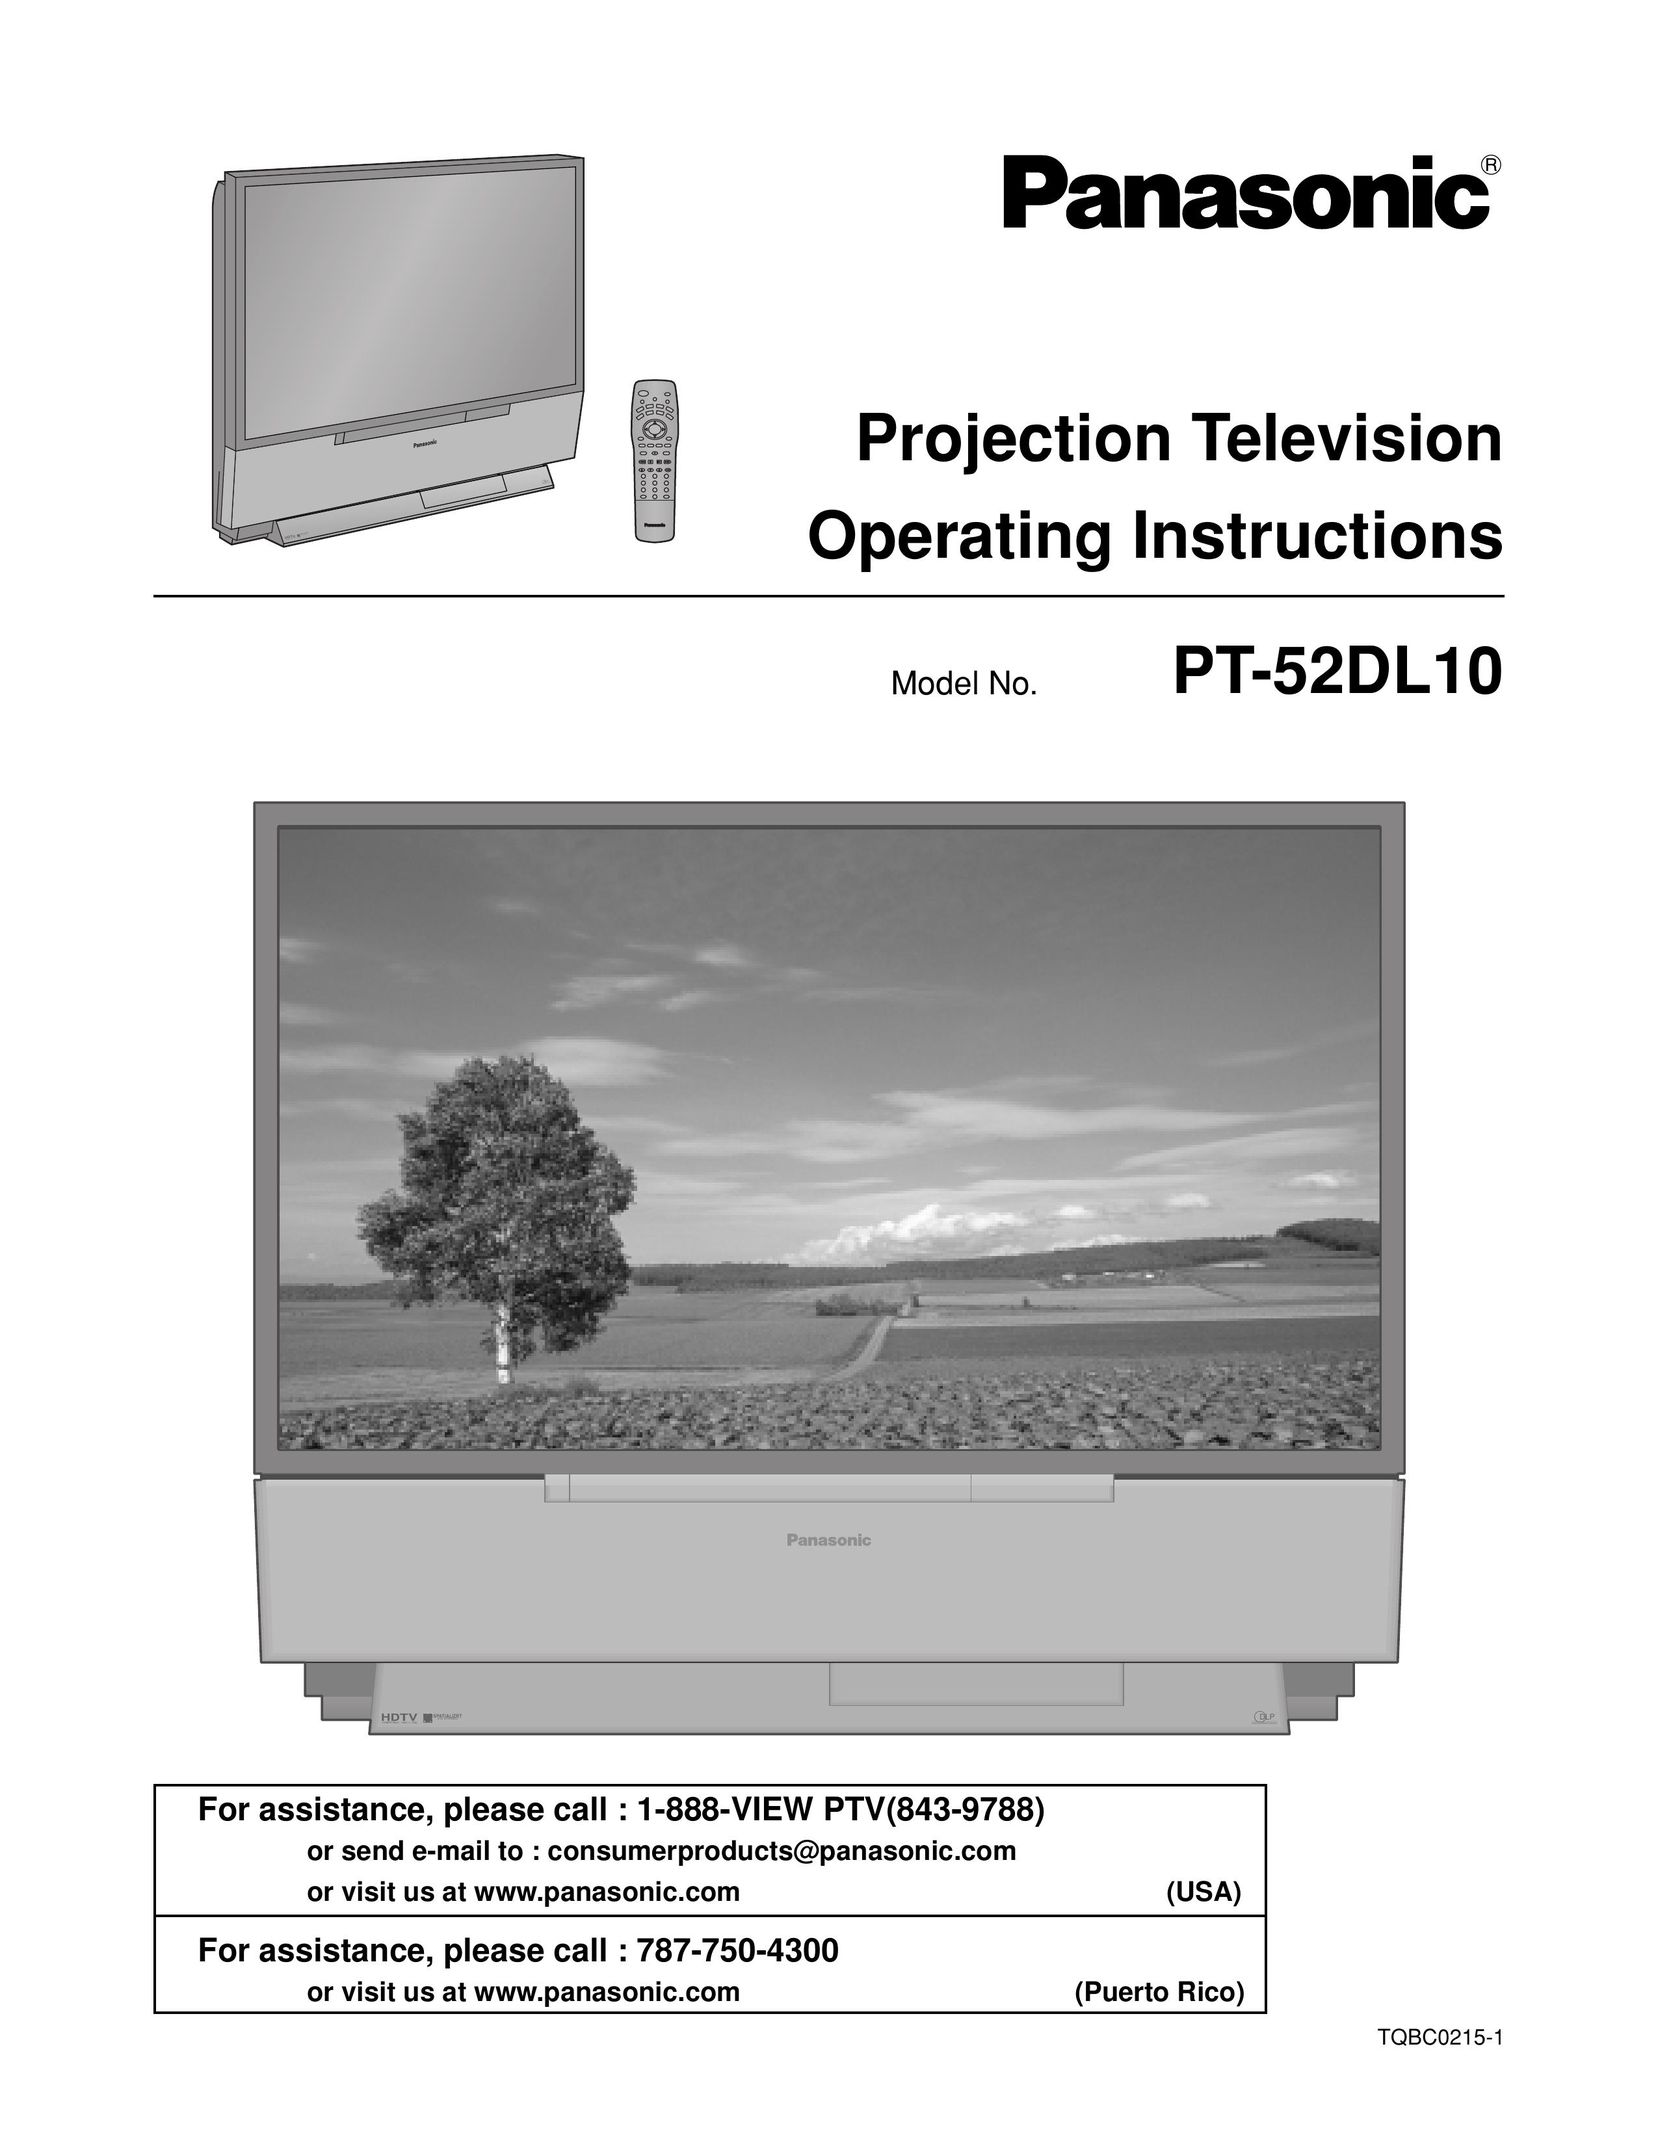 Panasonic PT 52DL10 Projection Television User Manual